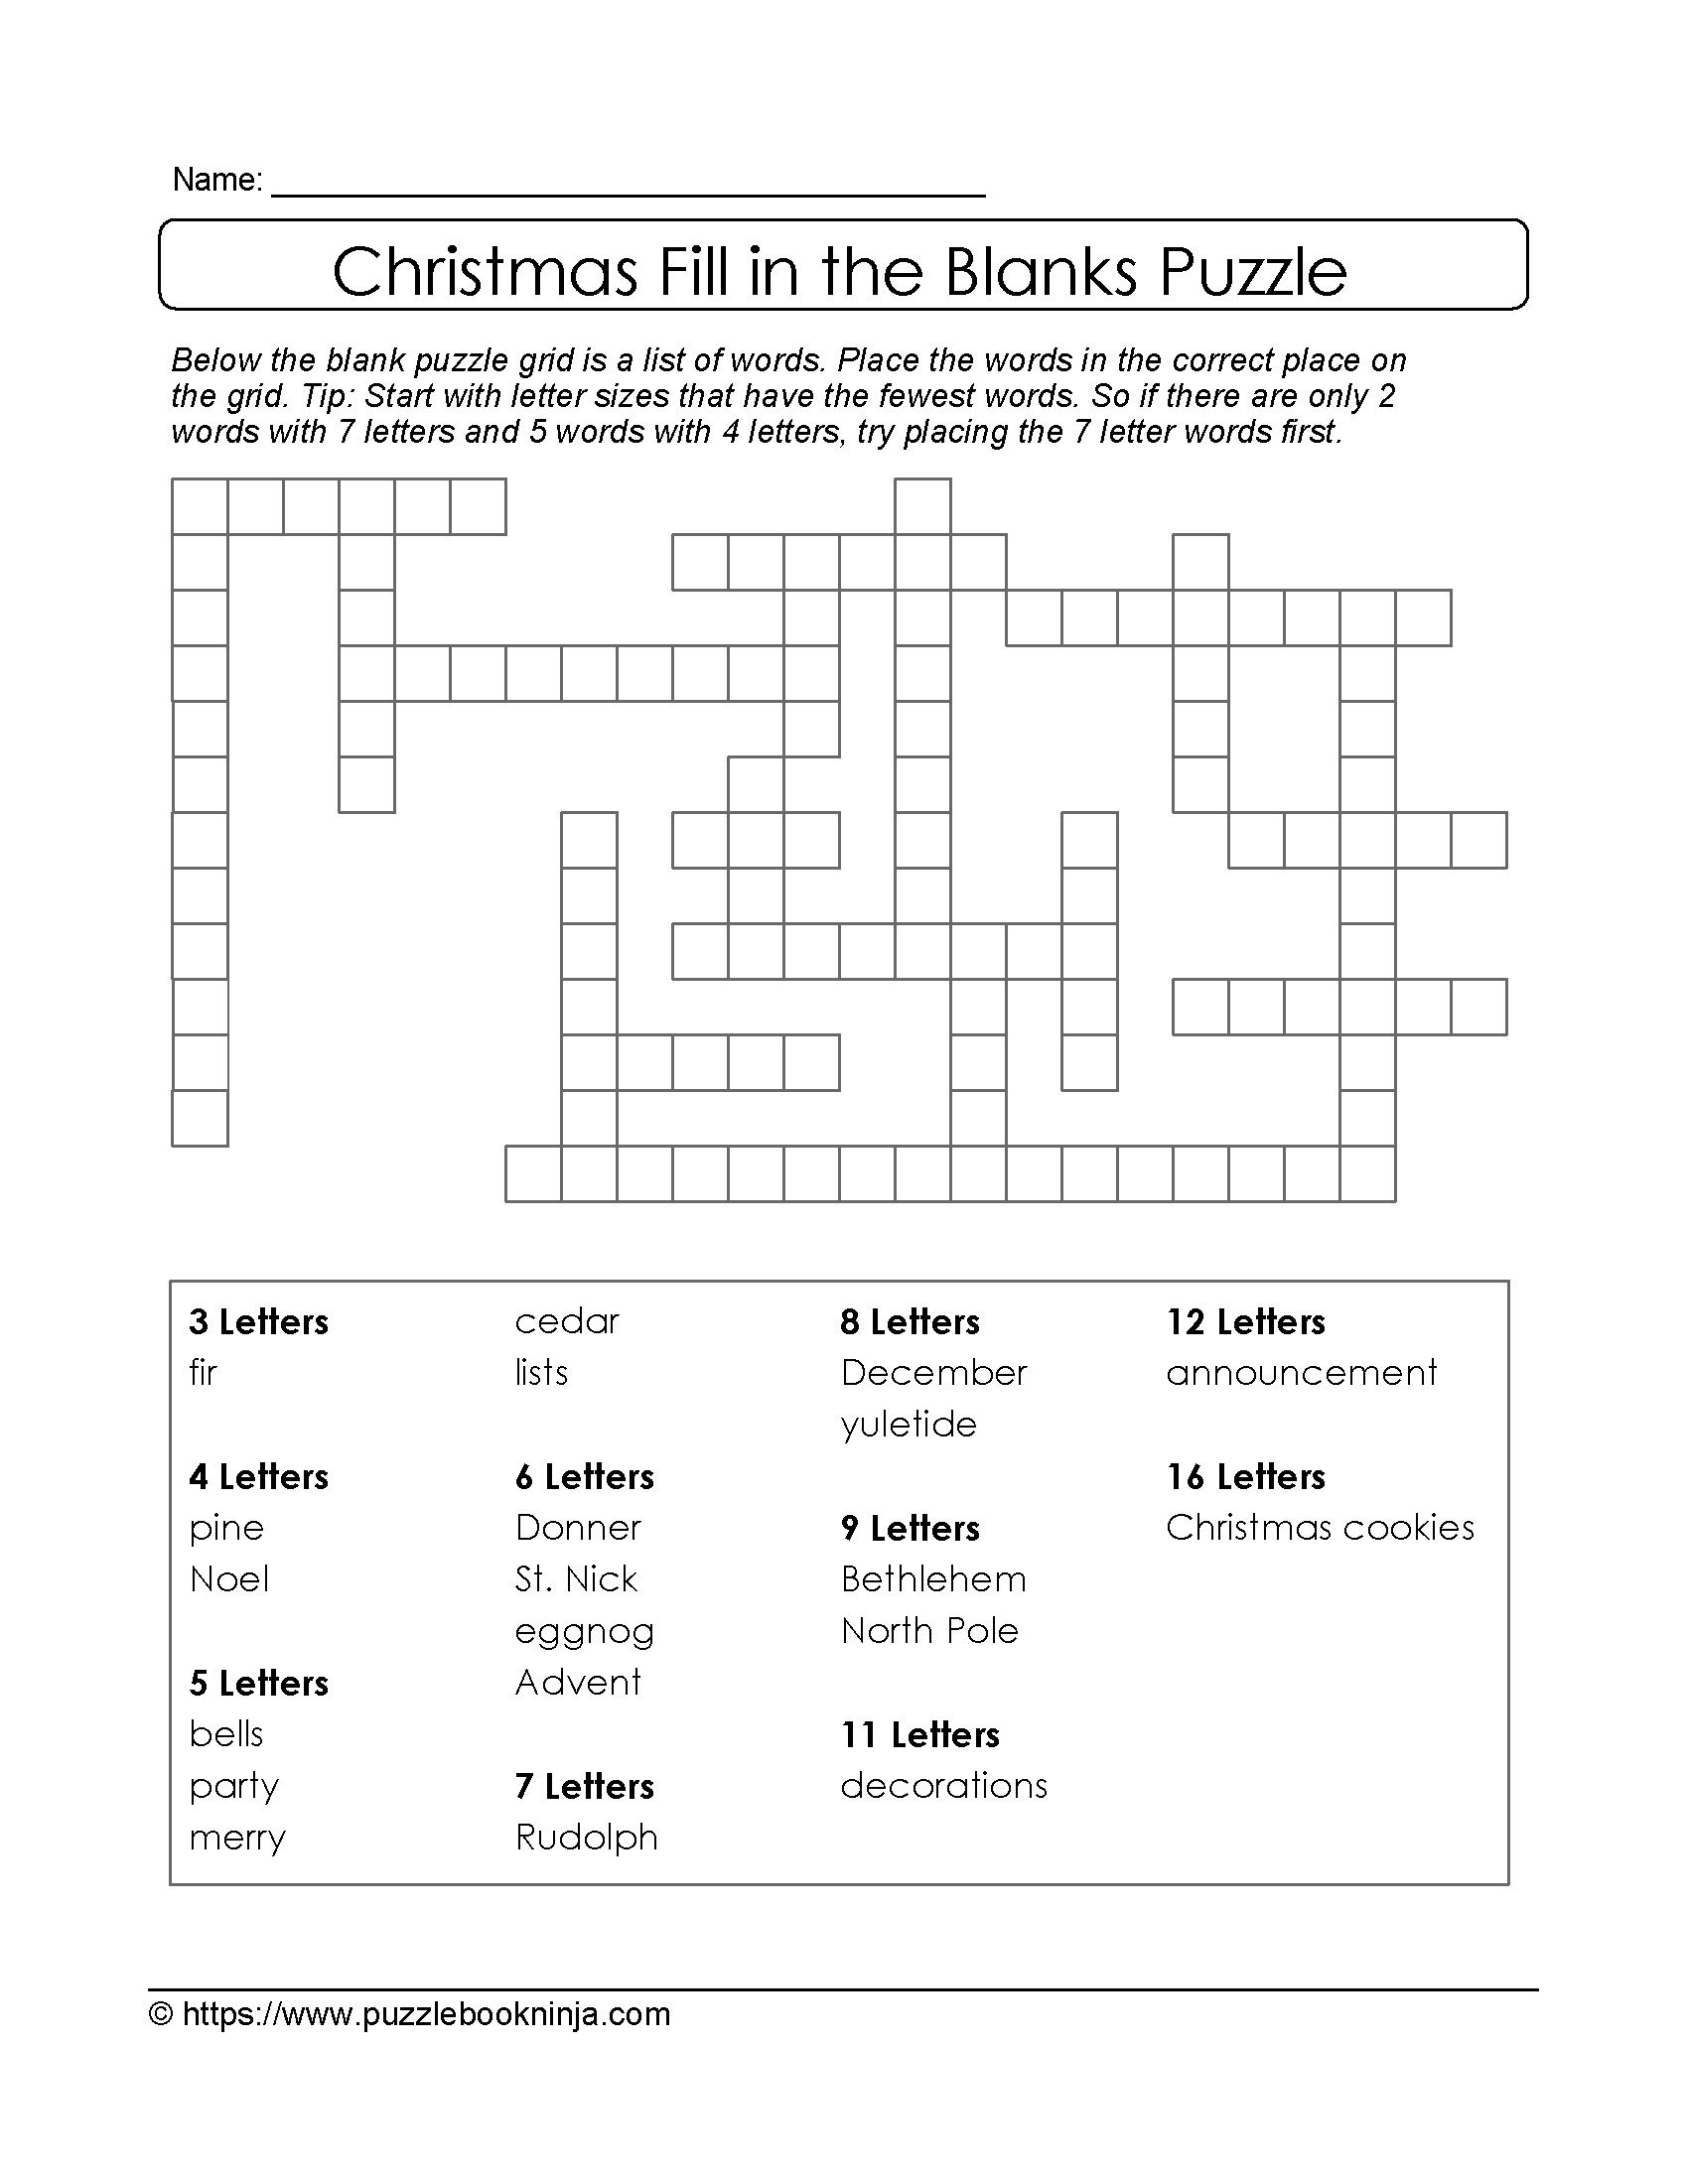 Christmas Printable Puzzle. Free Fill In The Blanks. | Christmas - Printable Puzzles To Solve